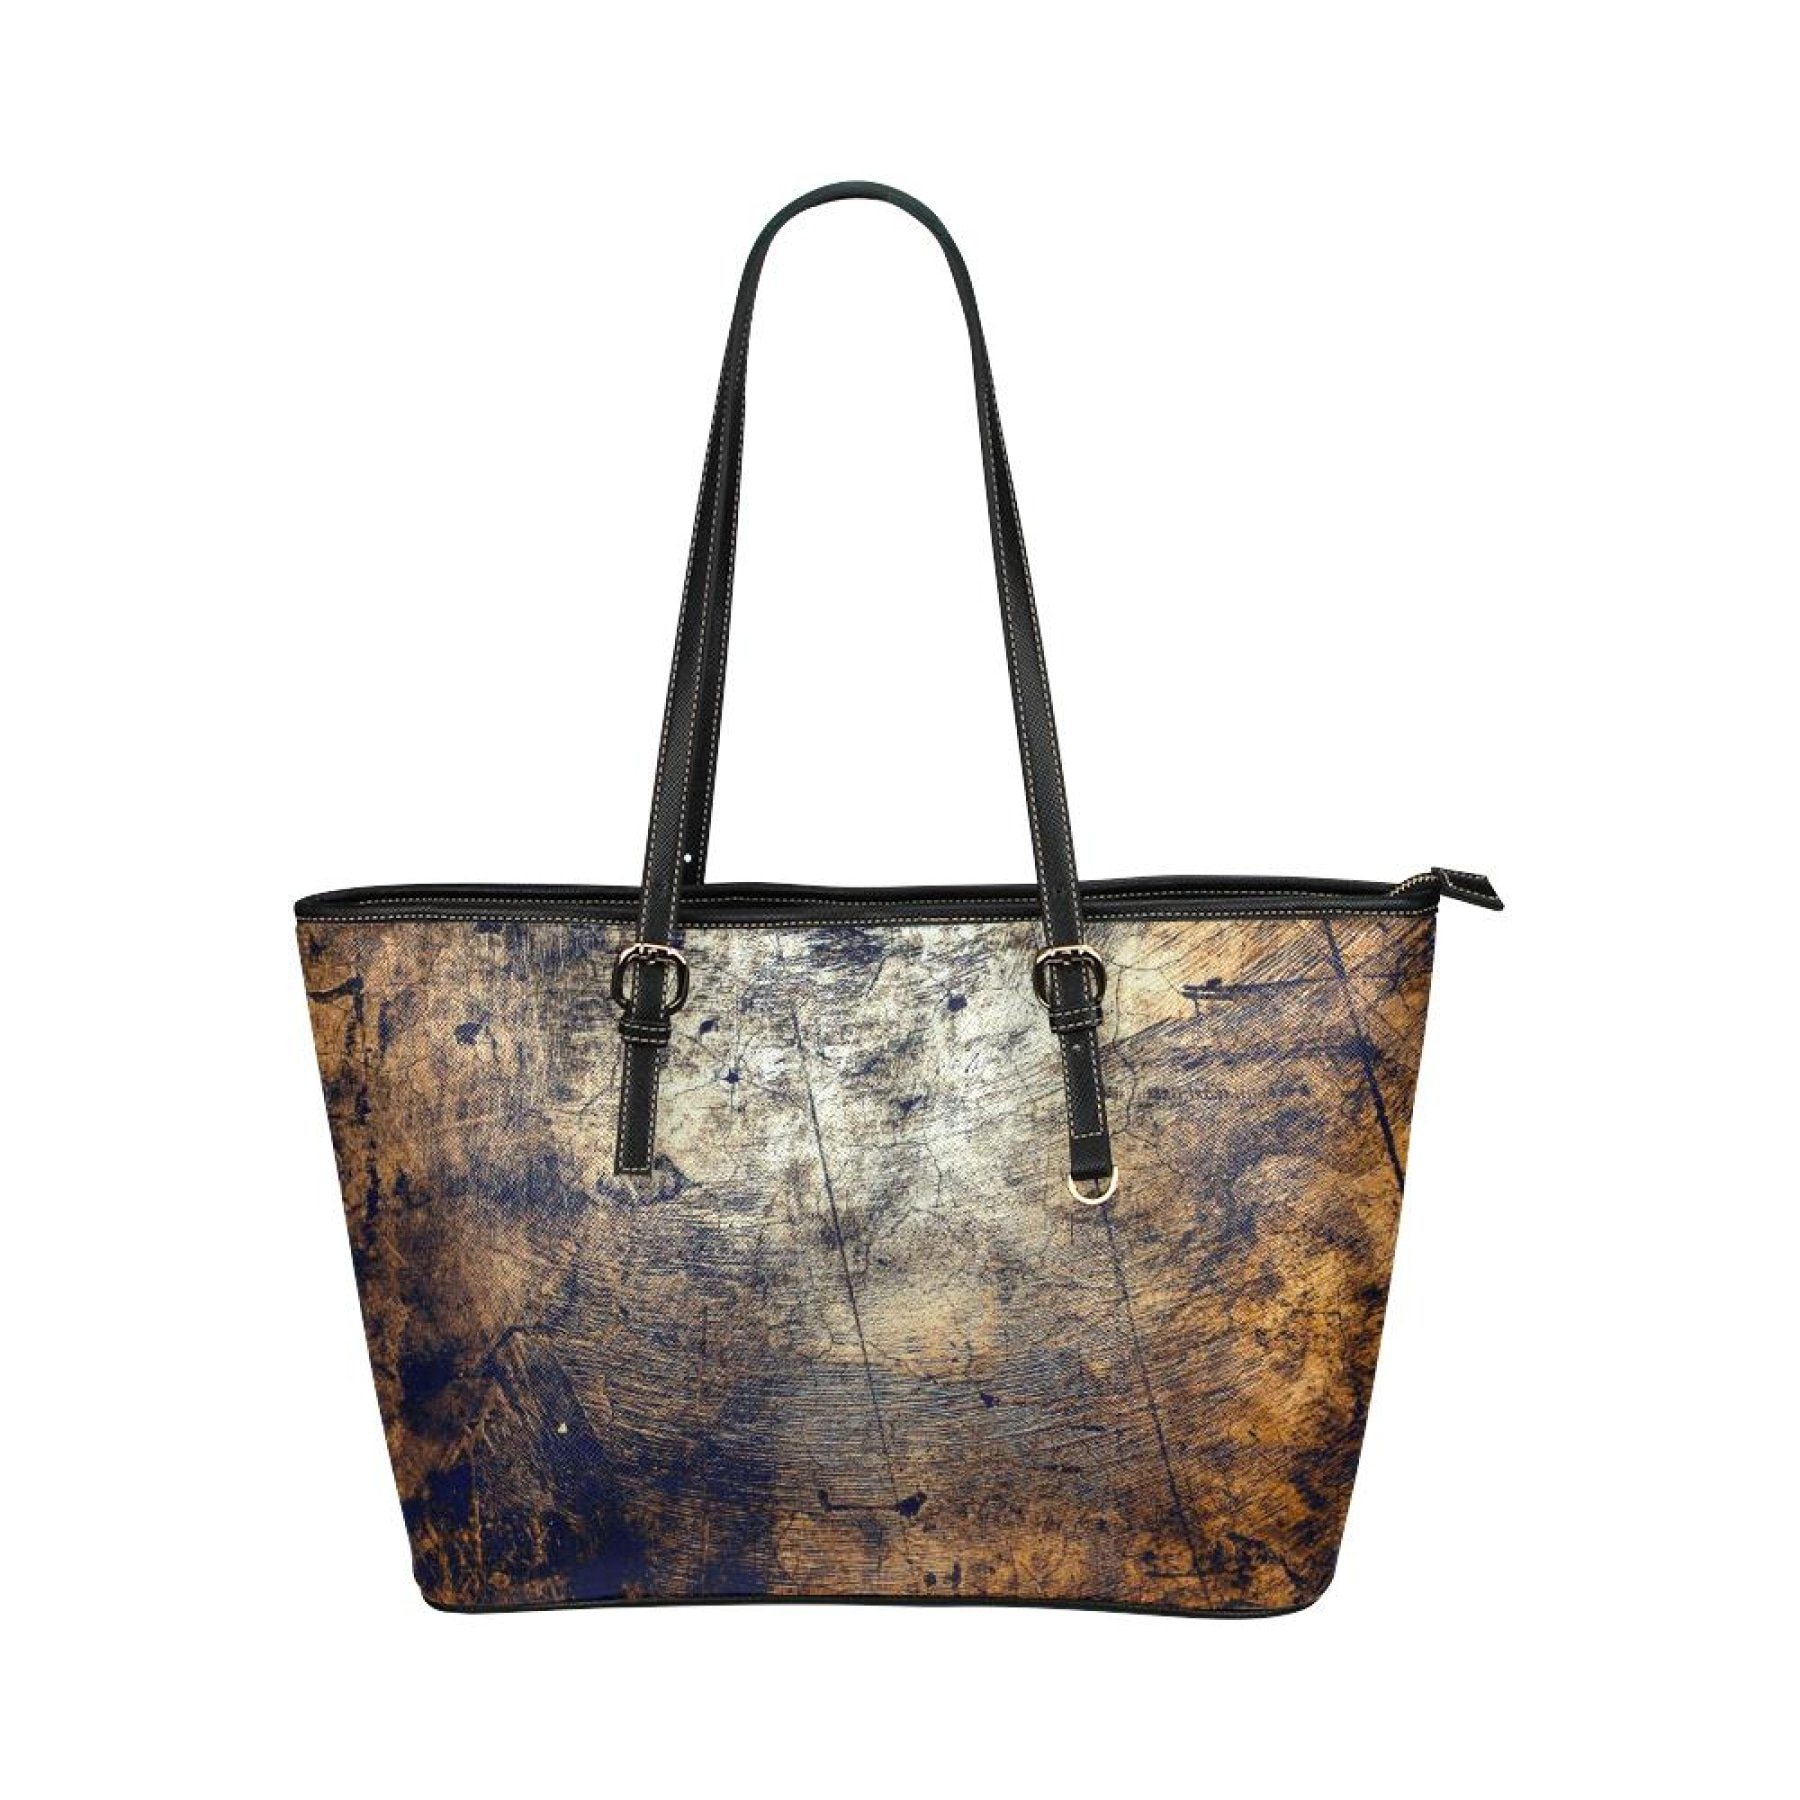 Brown Tote Shoulder Bag With Abstract Grunge Design 19